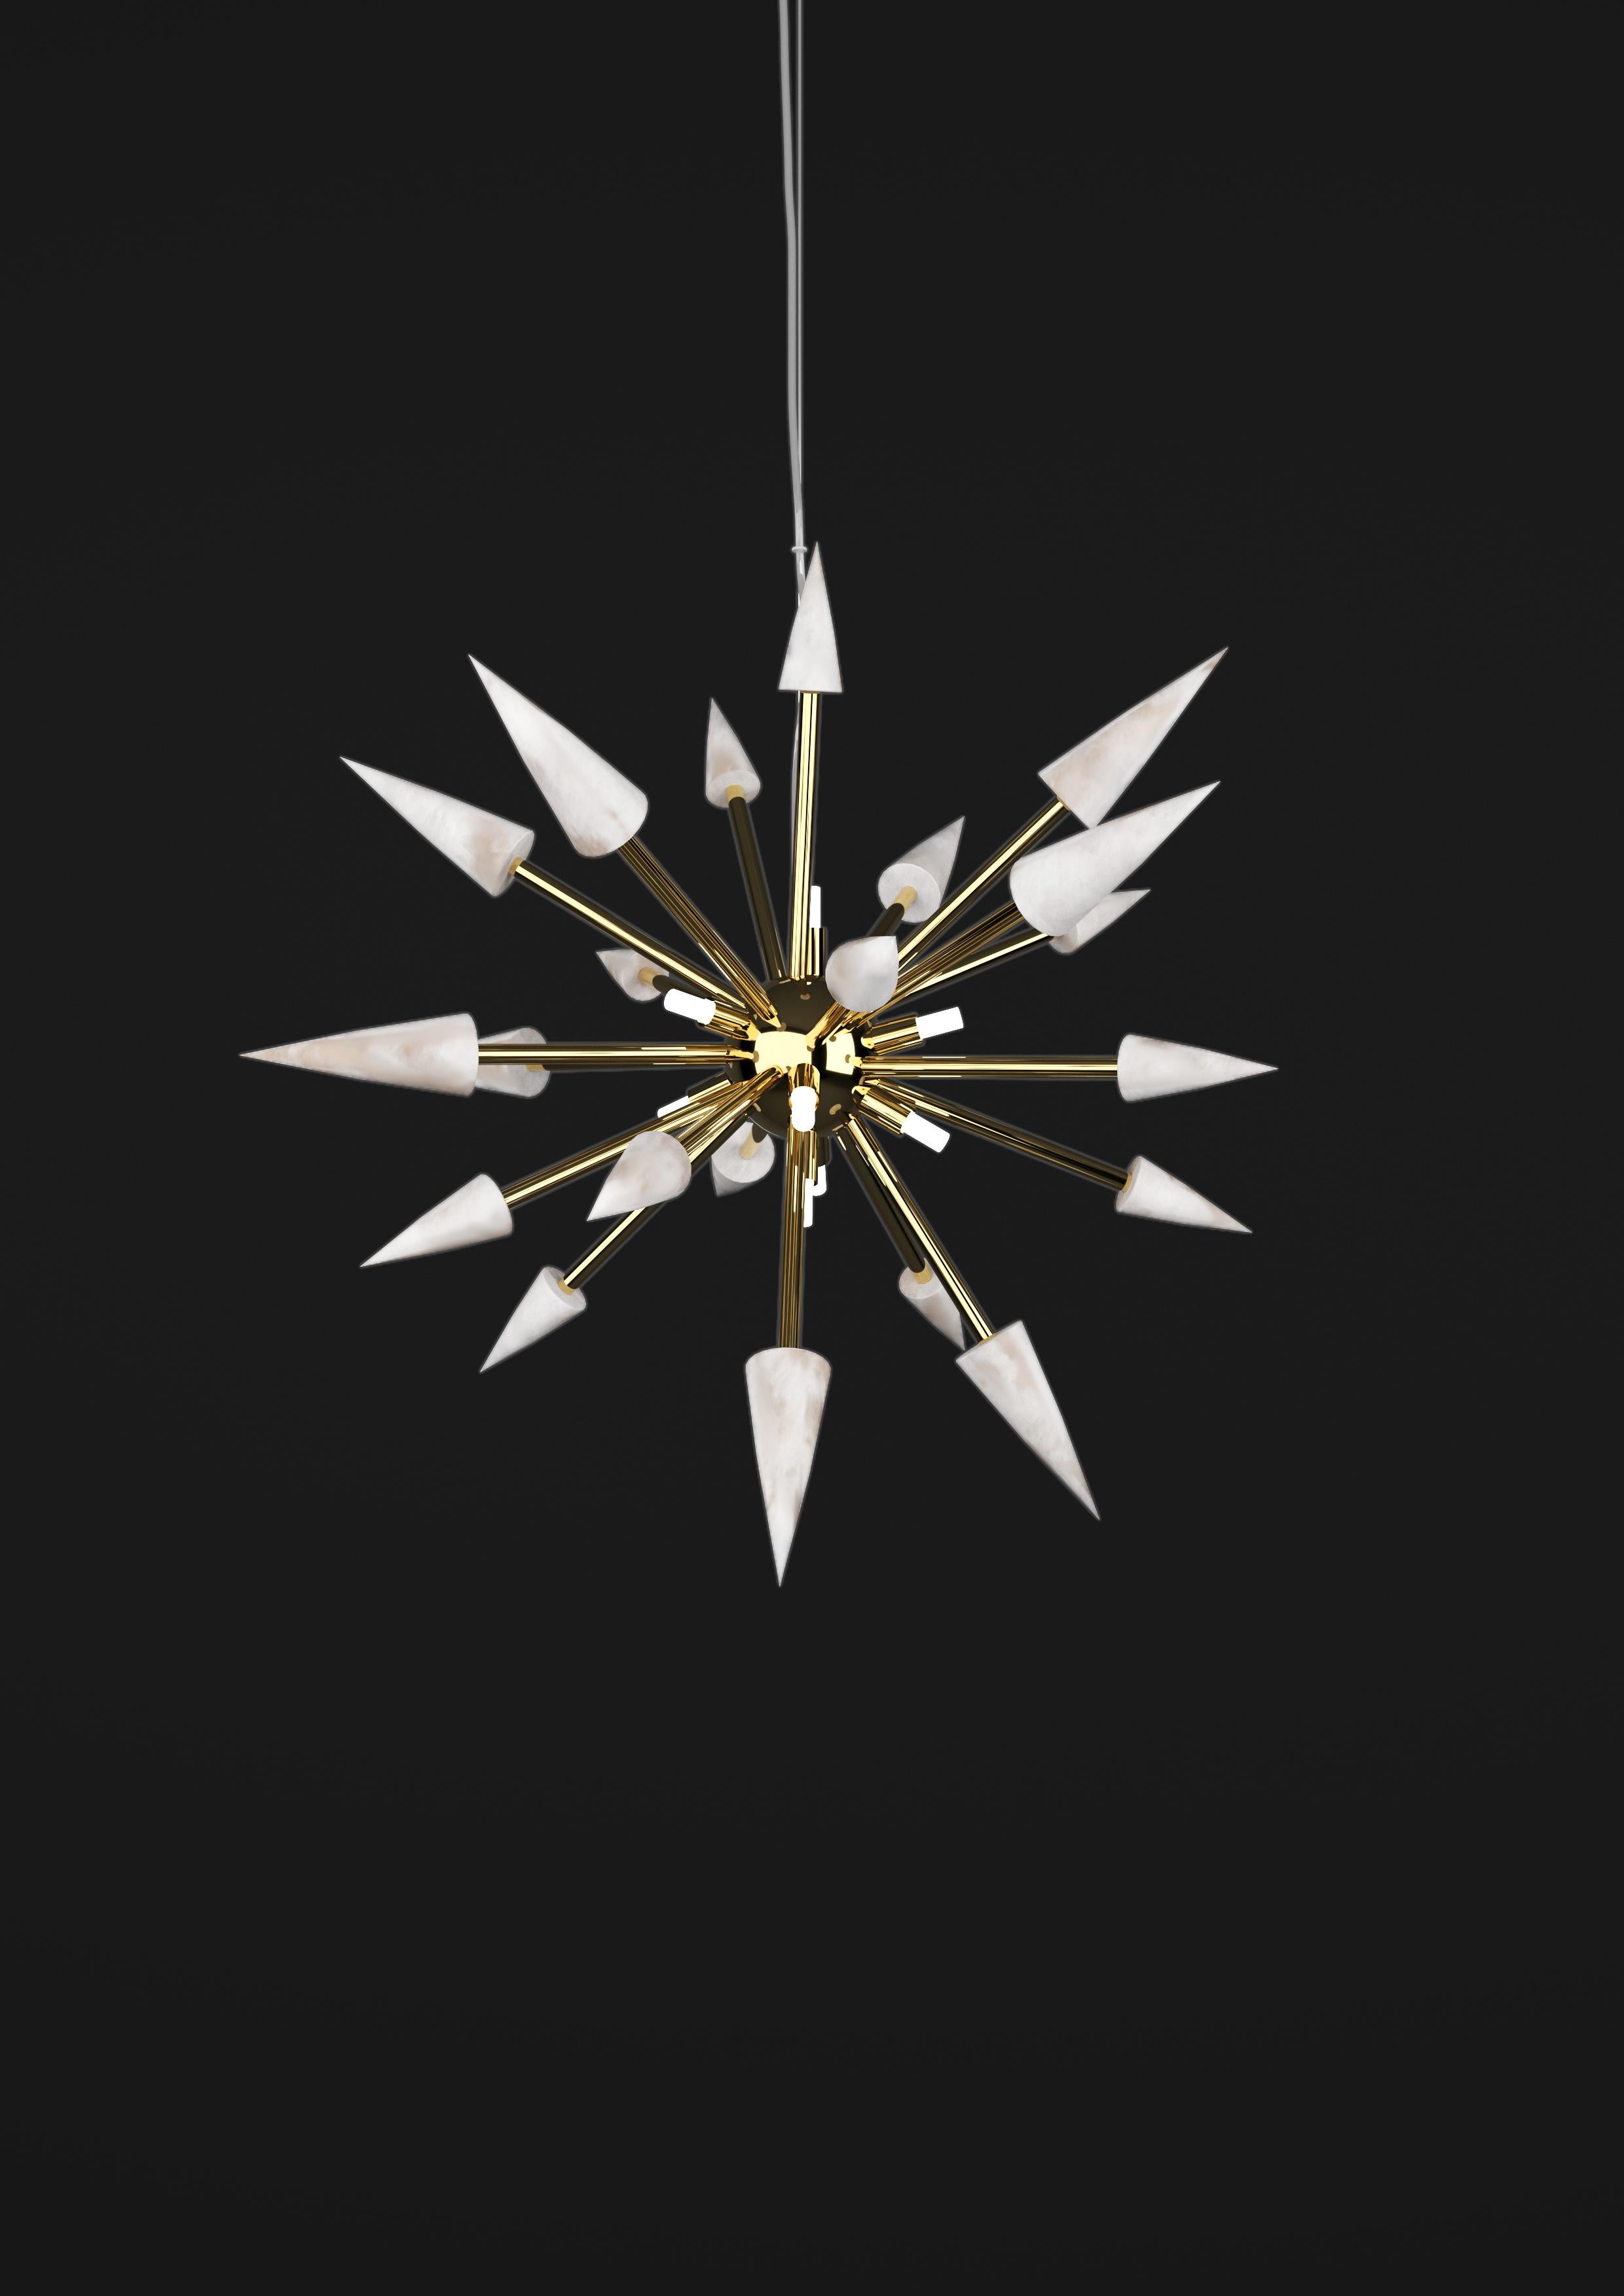 Perseo 50 Shiny Gold Metal Pendant Lamp by Alabastro Italiano
Dimensions: Ø 50 x H 300 cm.
Materials: White alabaster and metal.

Available in different finishes: Shiny Silver, Bronze, Brushed Brass, Ruggine of Florence, Brushed Burnished, Shiny